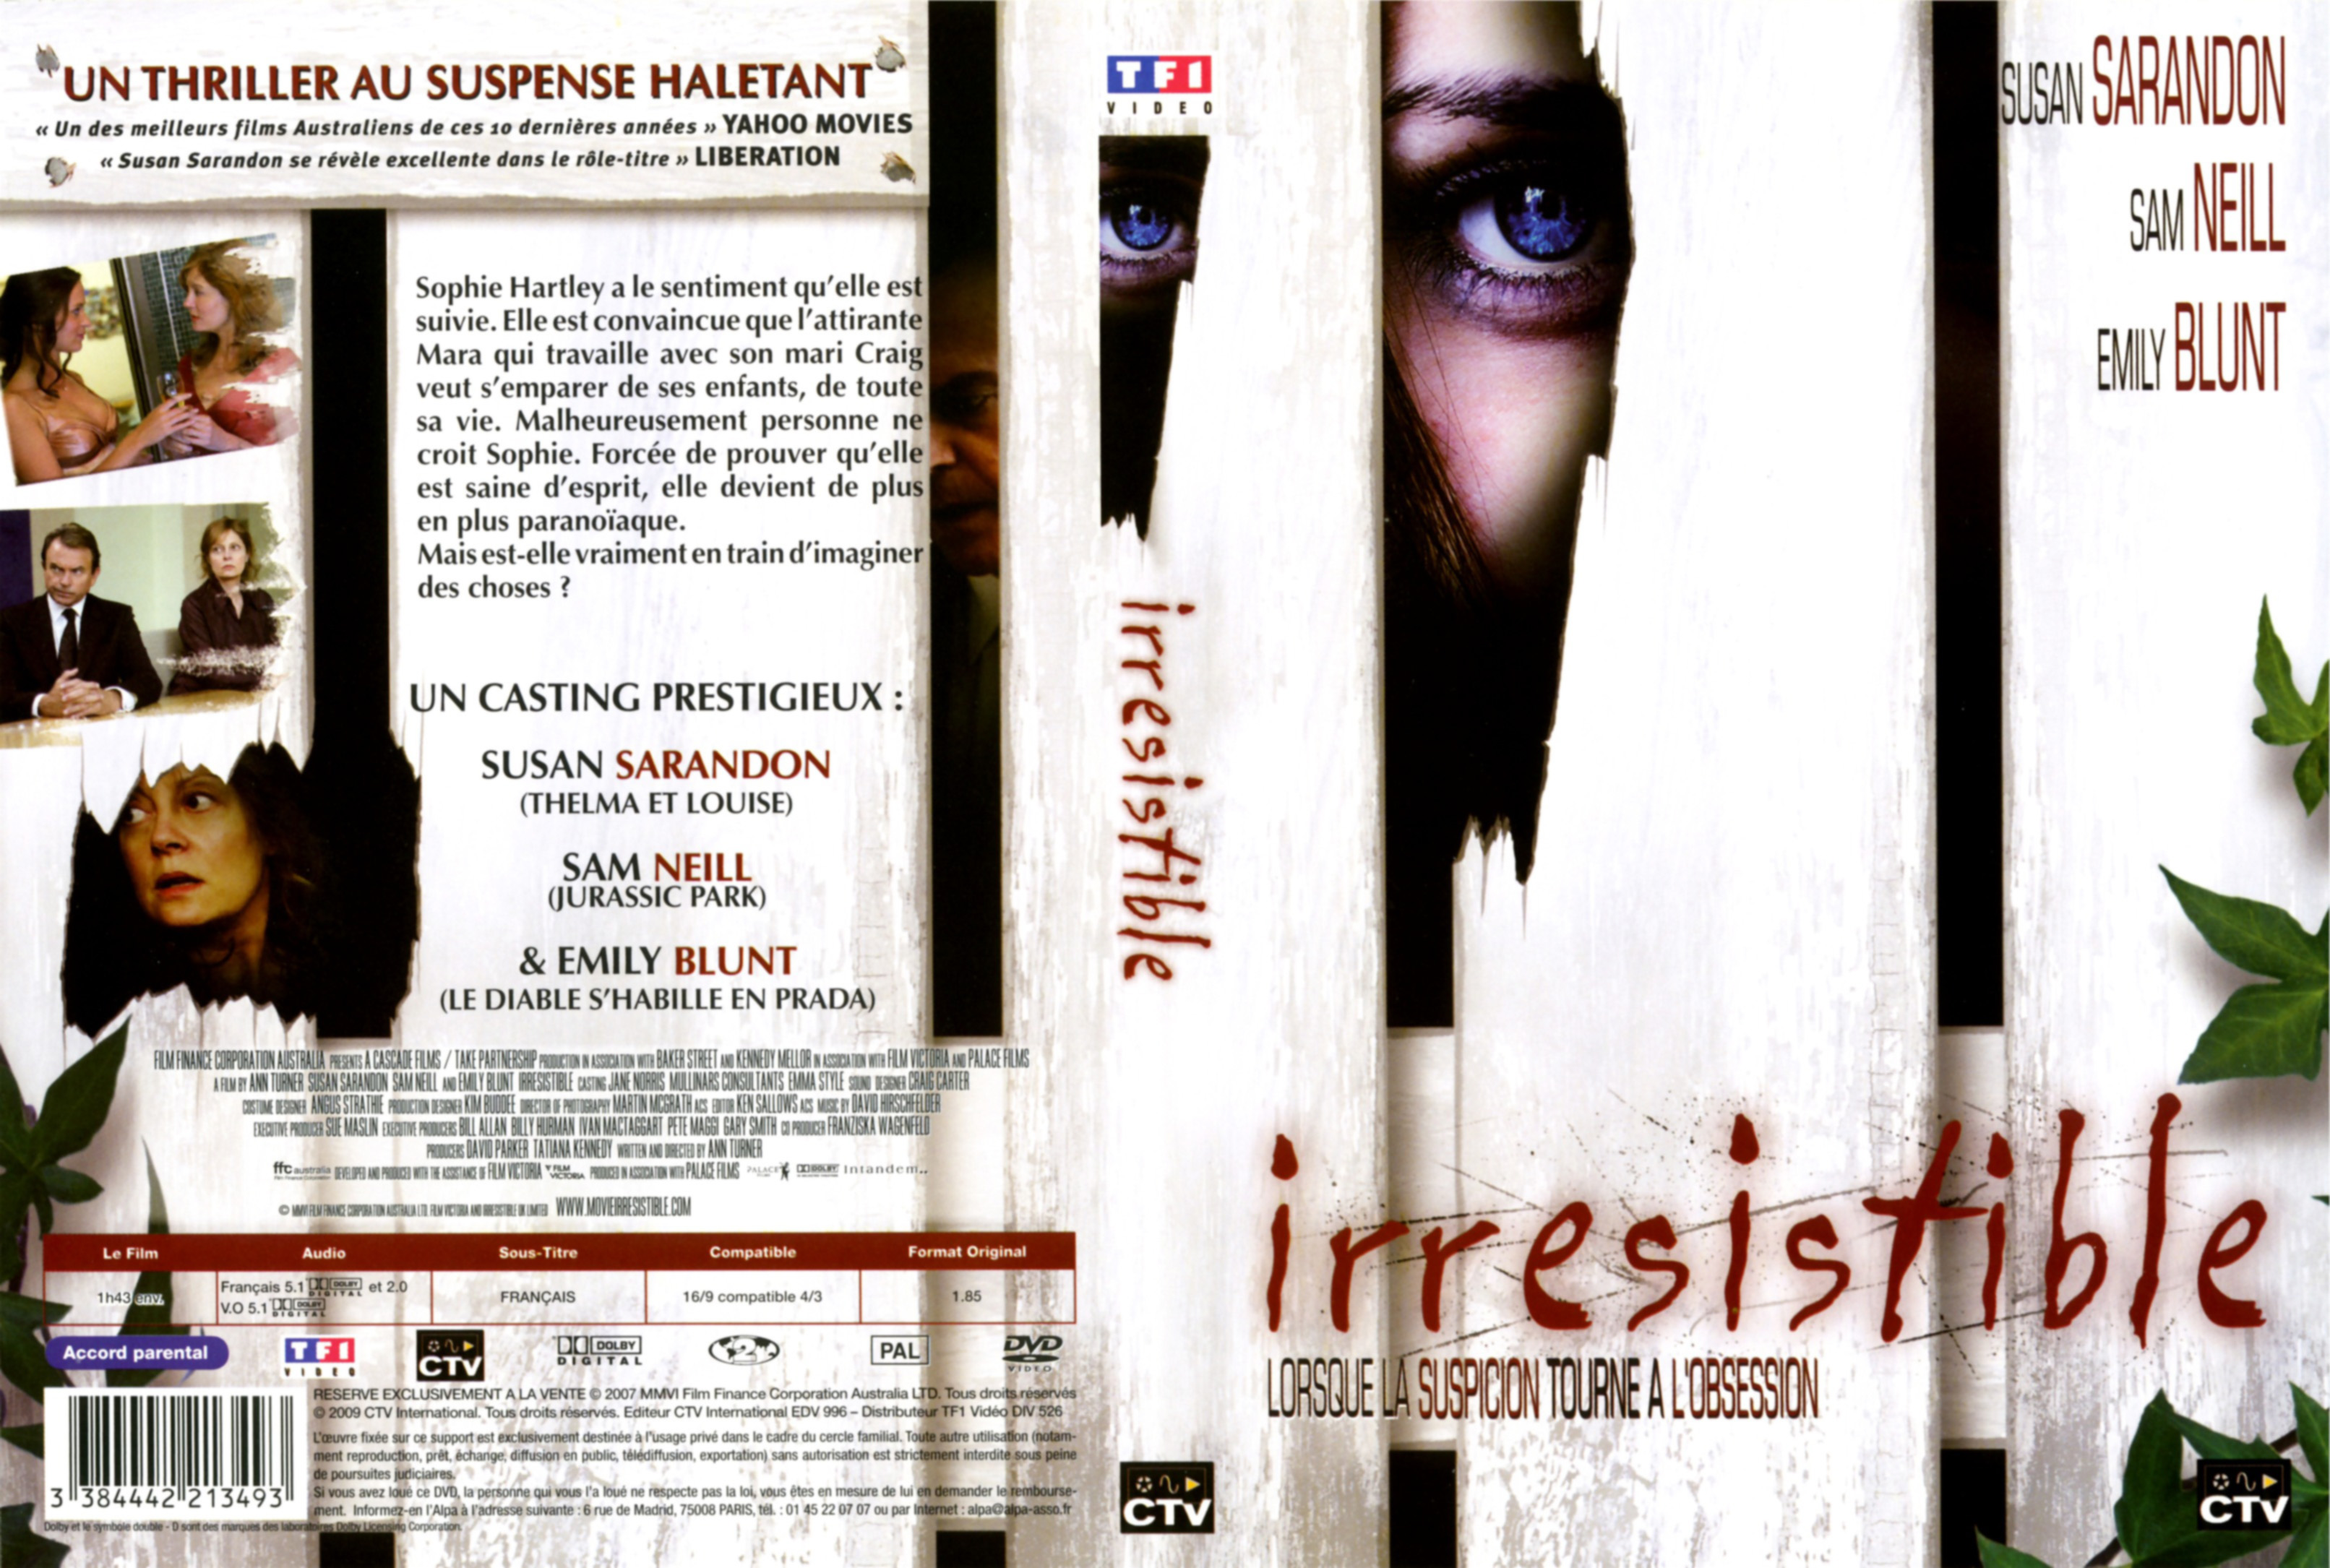 Jaquette DVD Irresistible